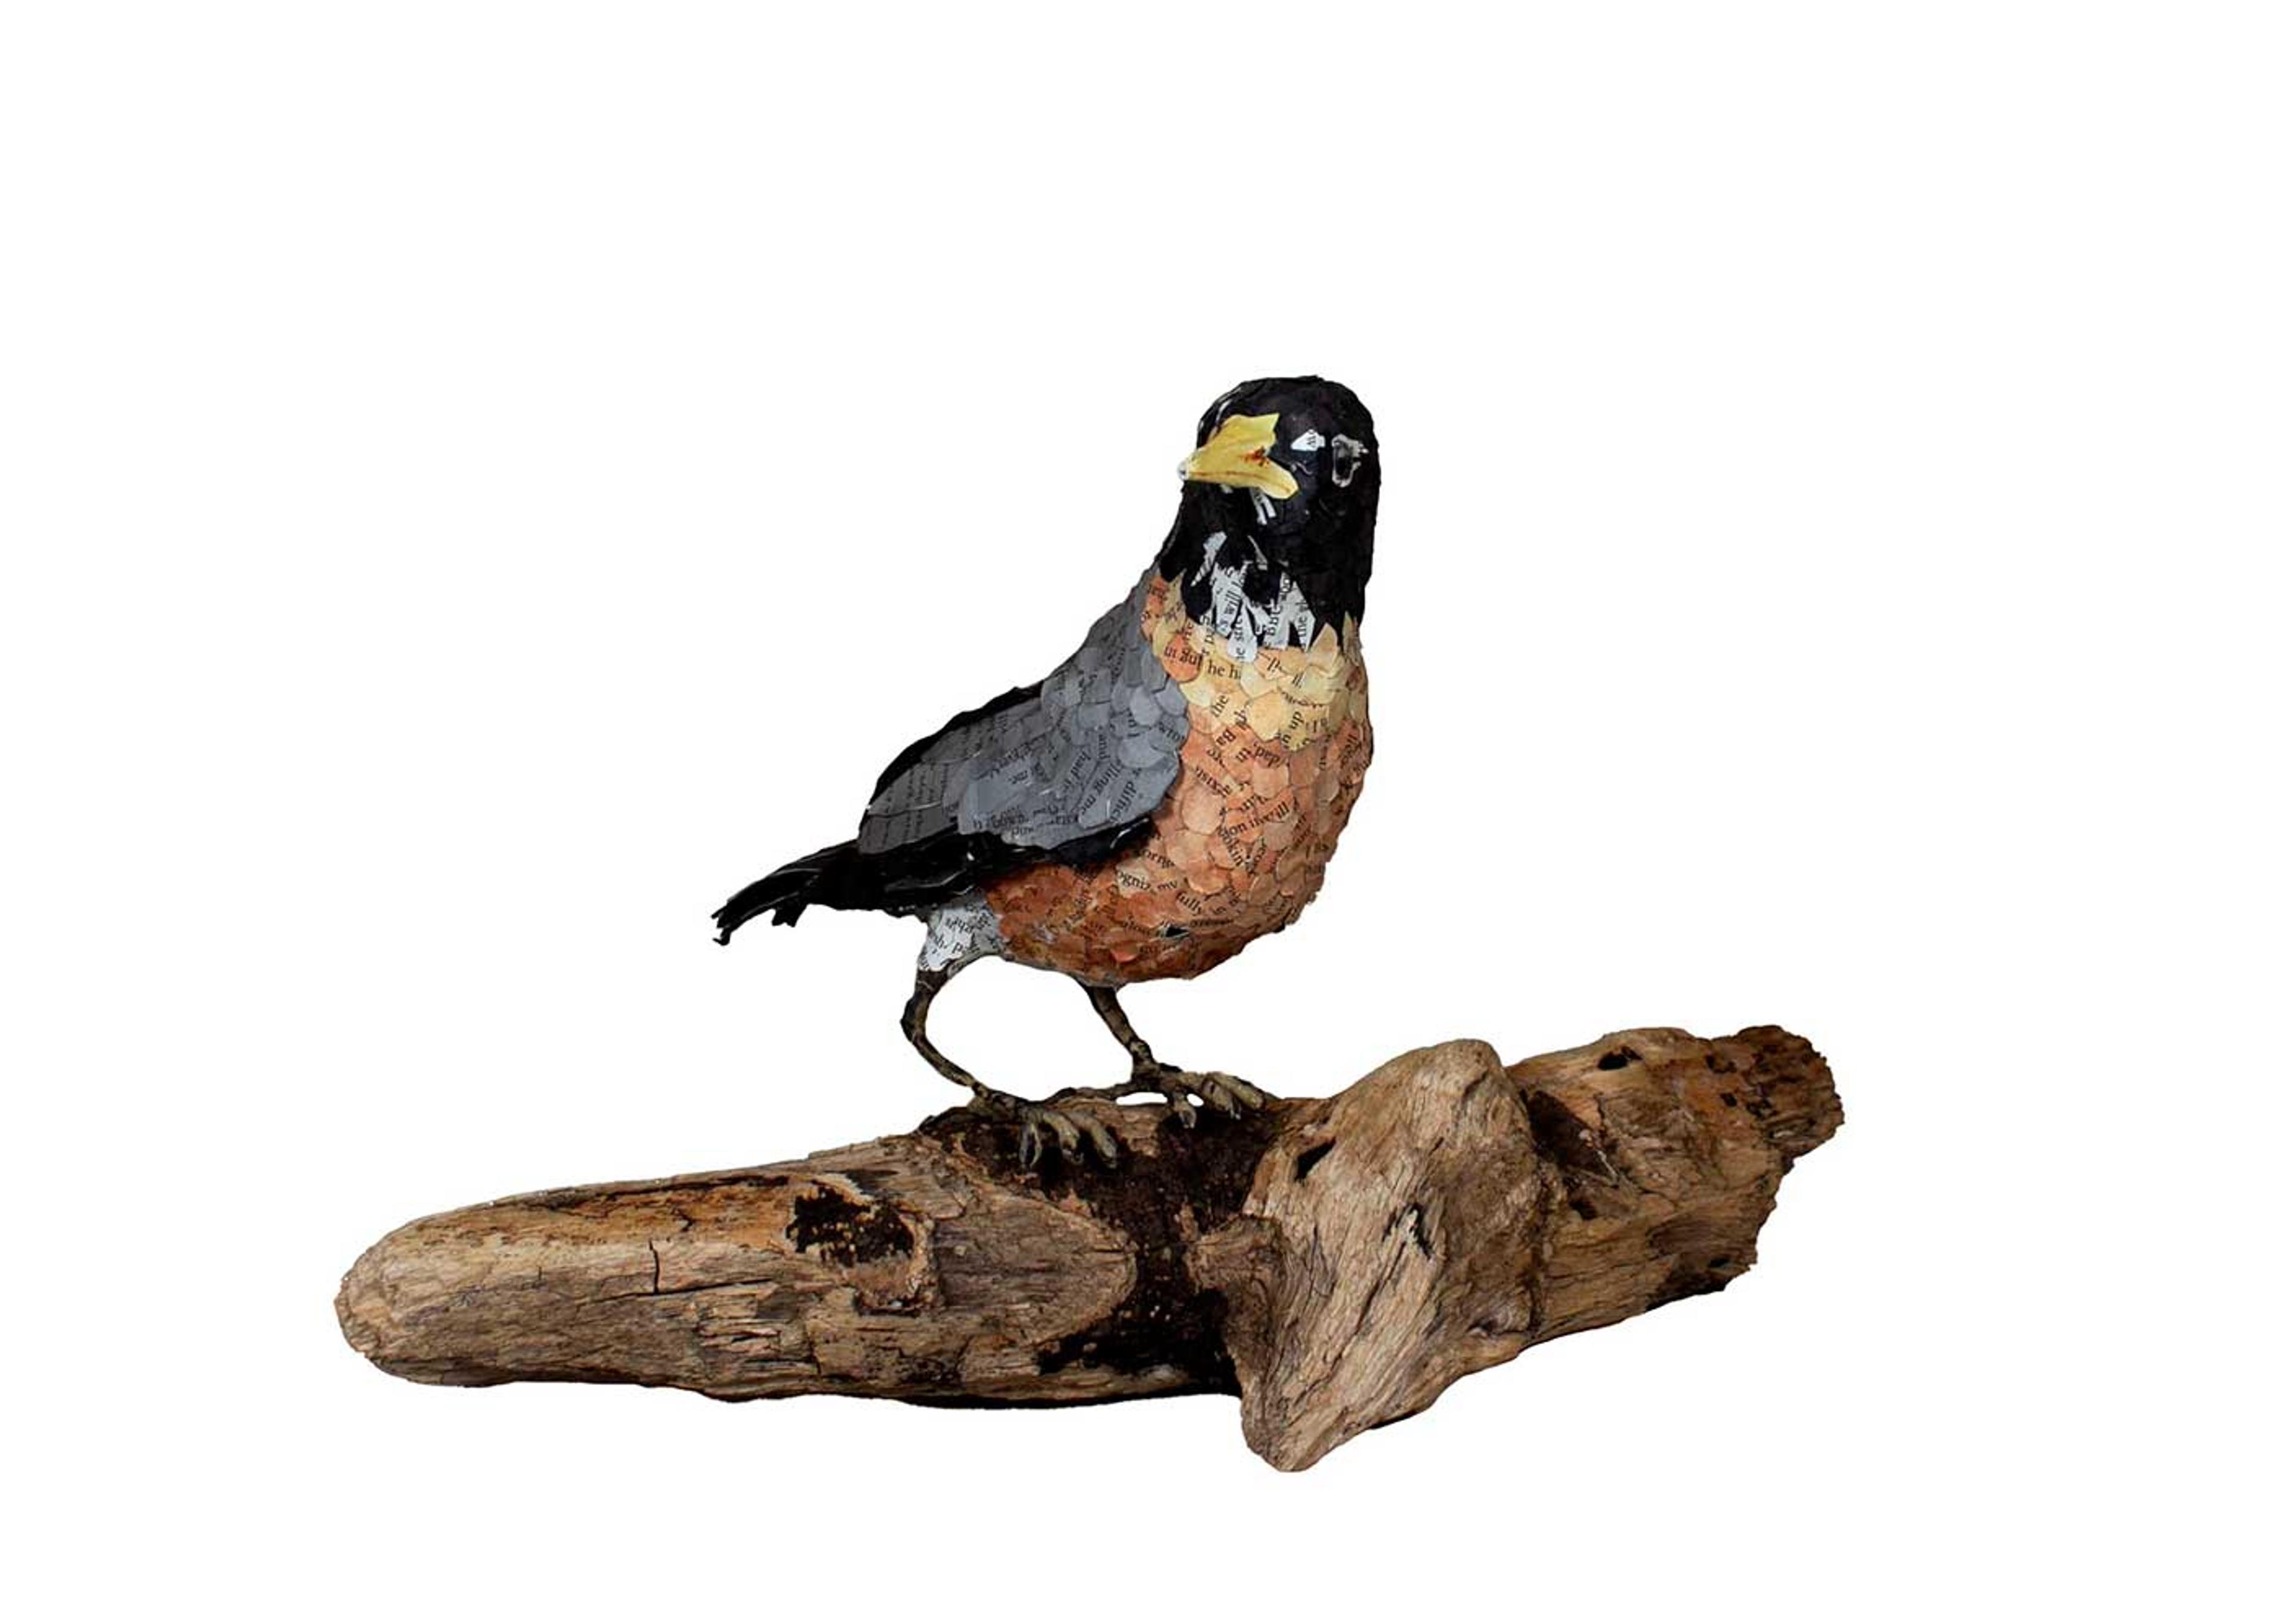 Sculpture of a robin sitting on a branch.